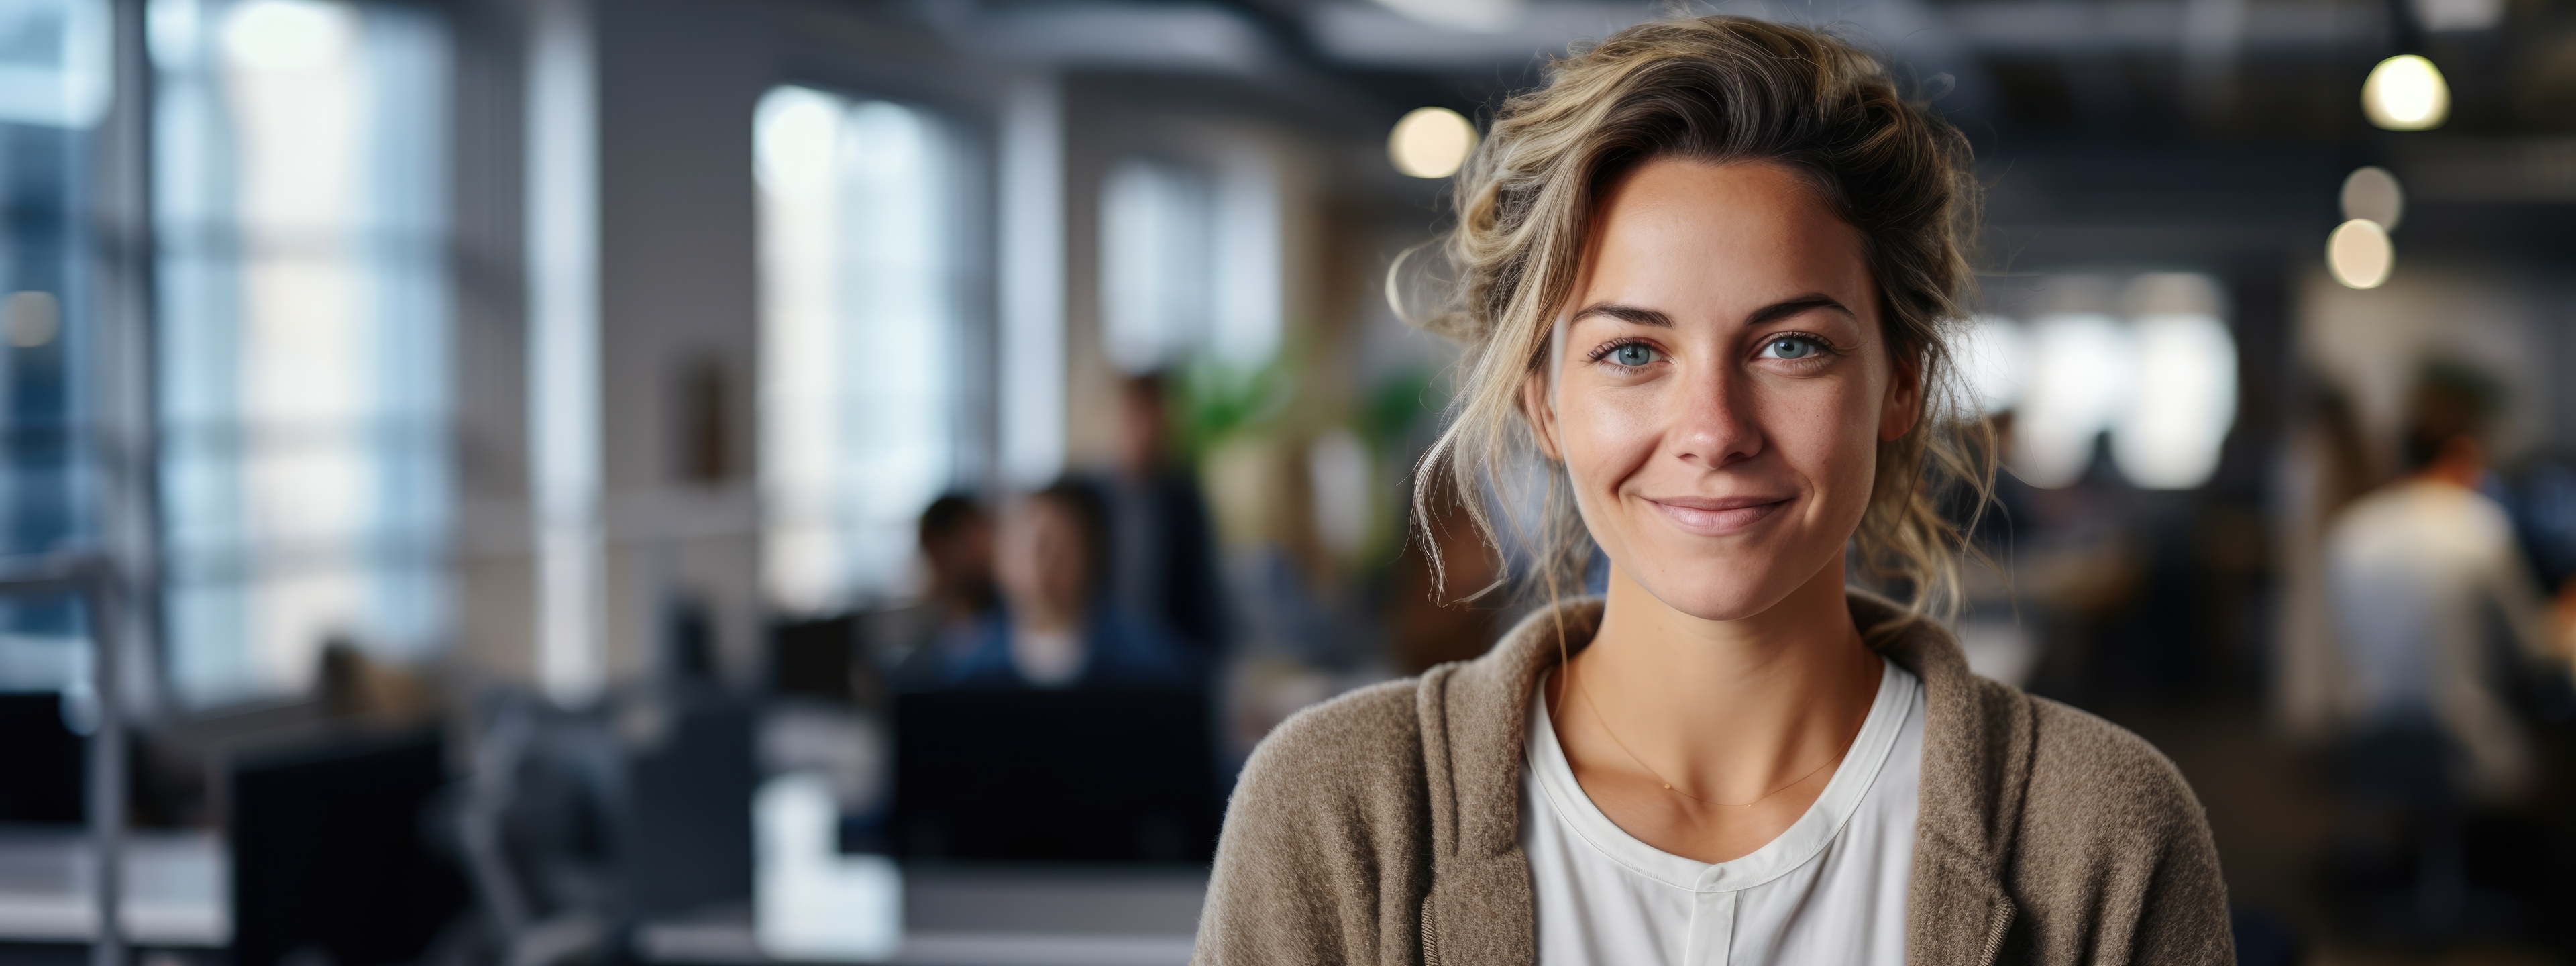 Smiling confident professional woman posing at her business office with her coworkers and employees in the background